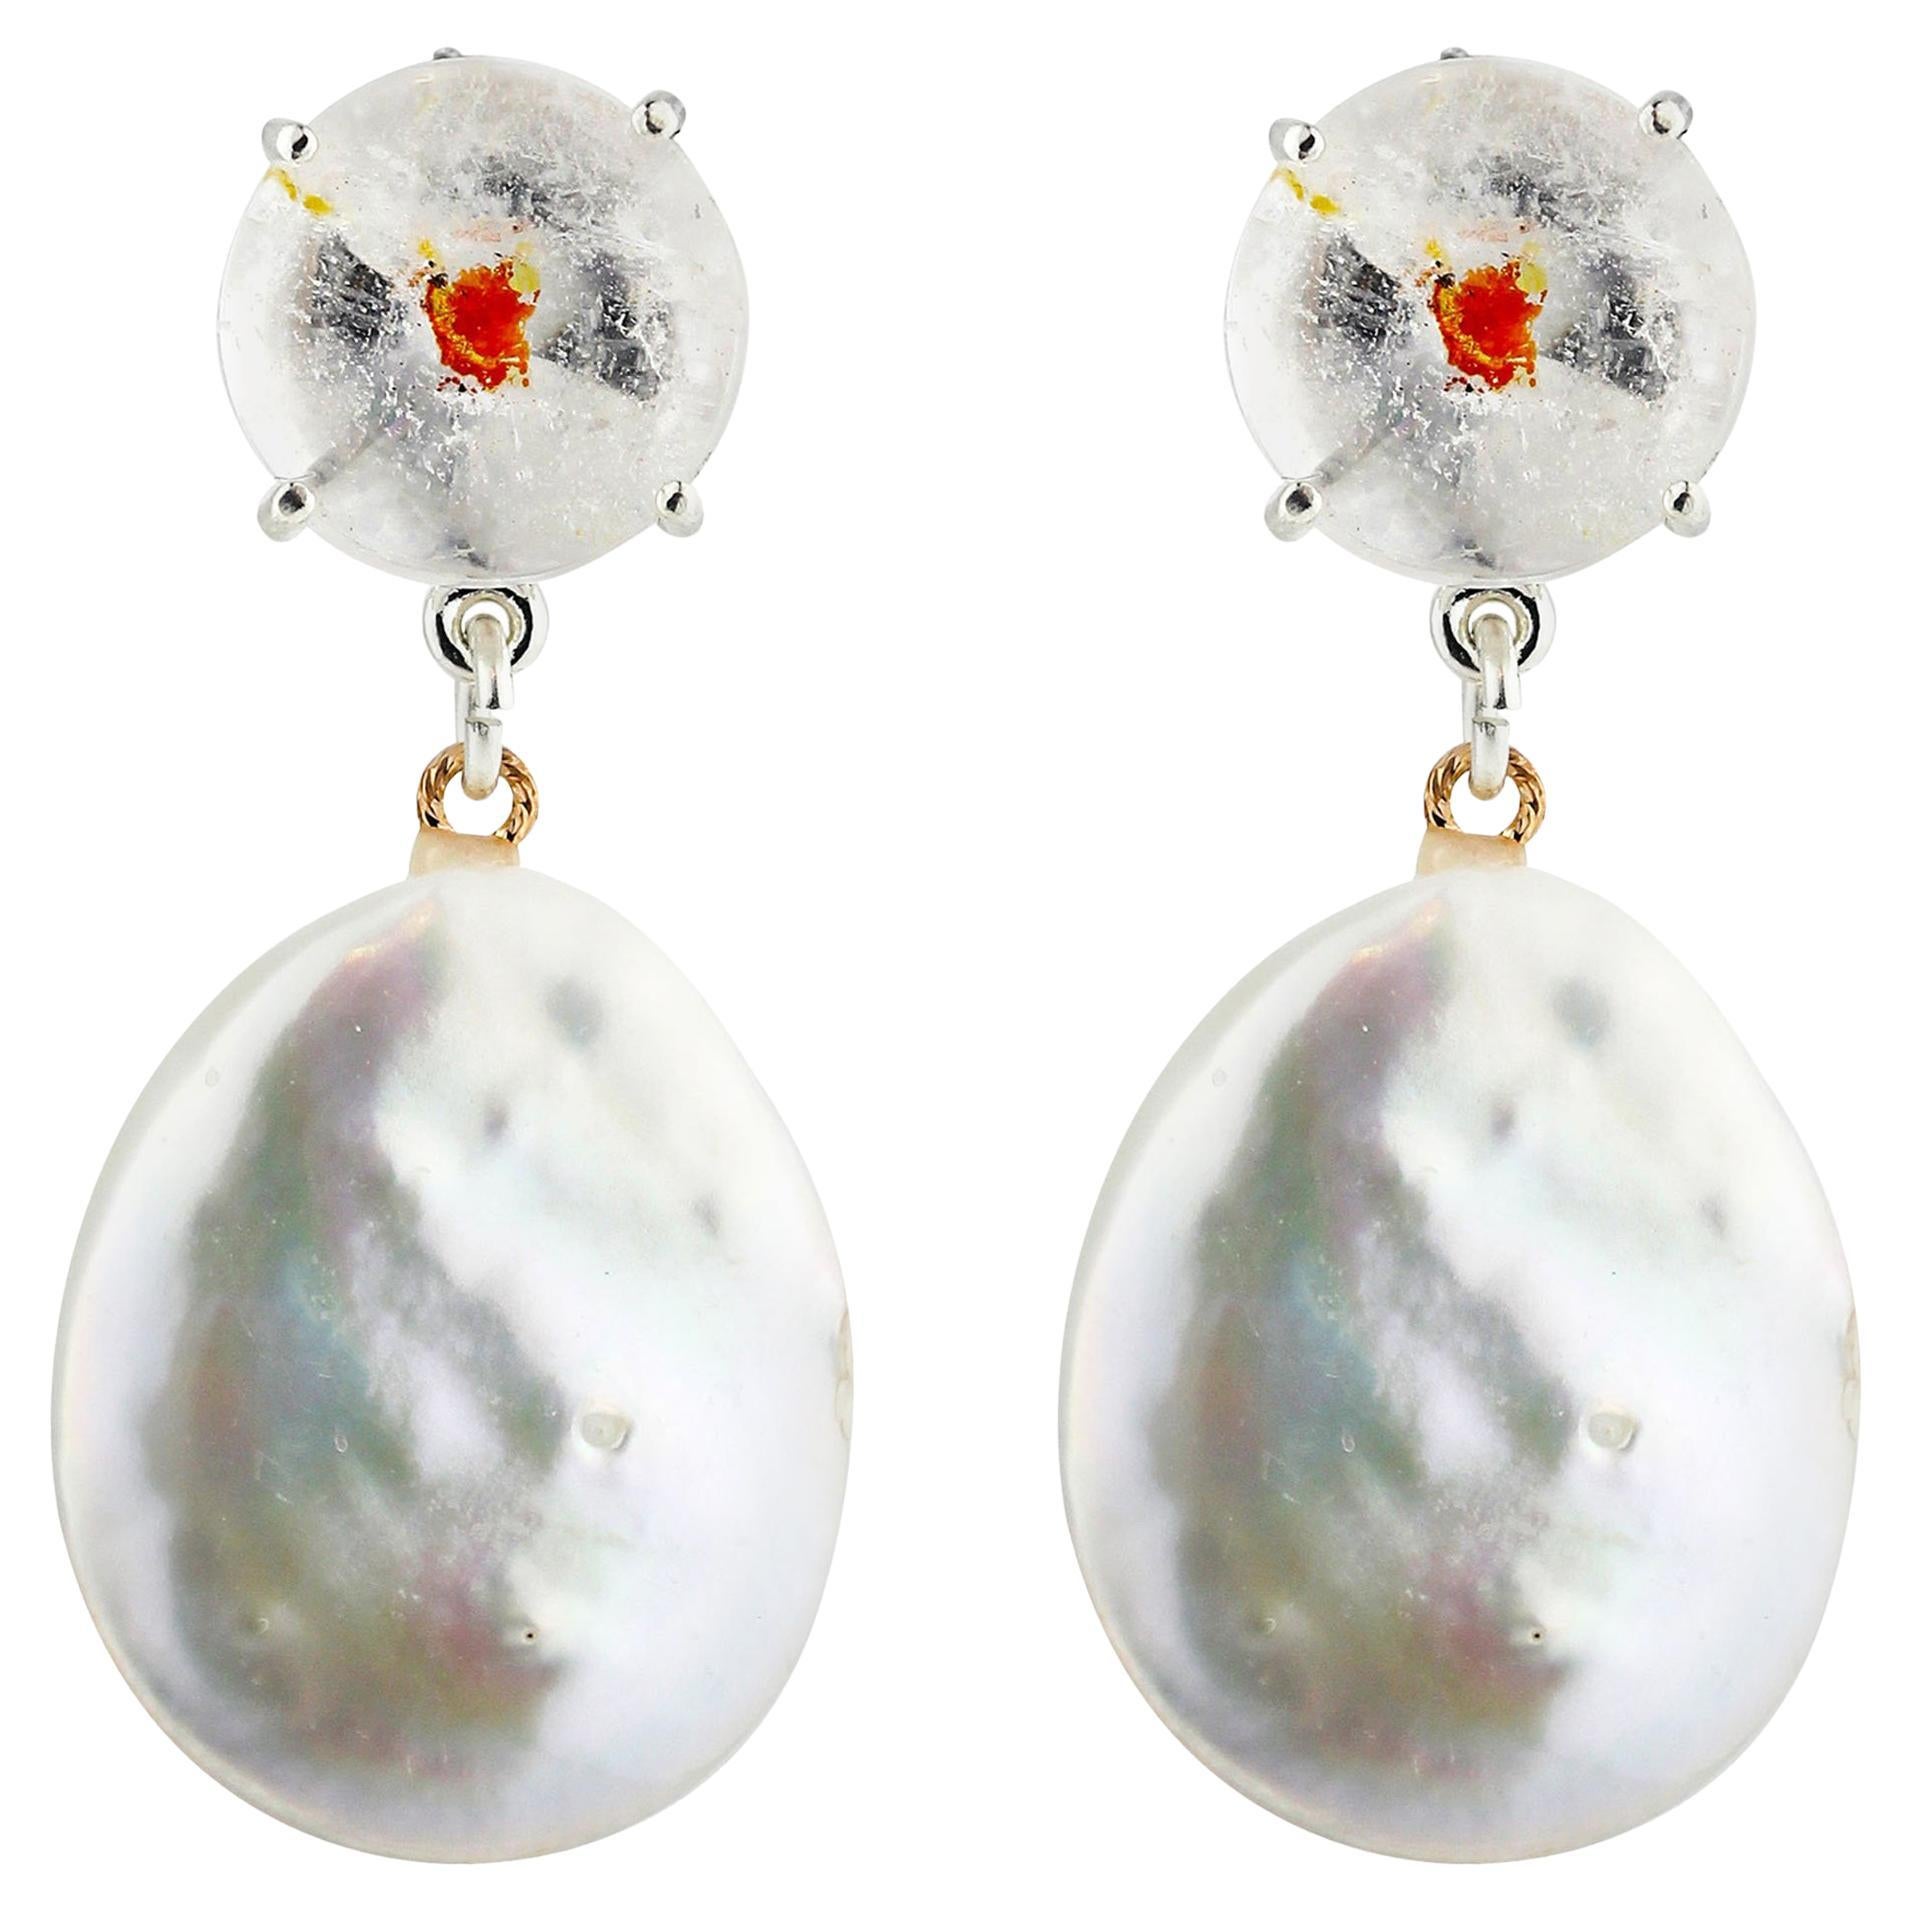 These amazingly beautiful round partially TRANSLUCENT Corundum gems are 13.8 mm and are 16.55 carats.  They elegantly dangle real cultured Coin Pearls on sterling silver stud earrings and hang approximately 1.84 inches long.  The pearls are both